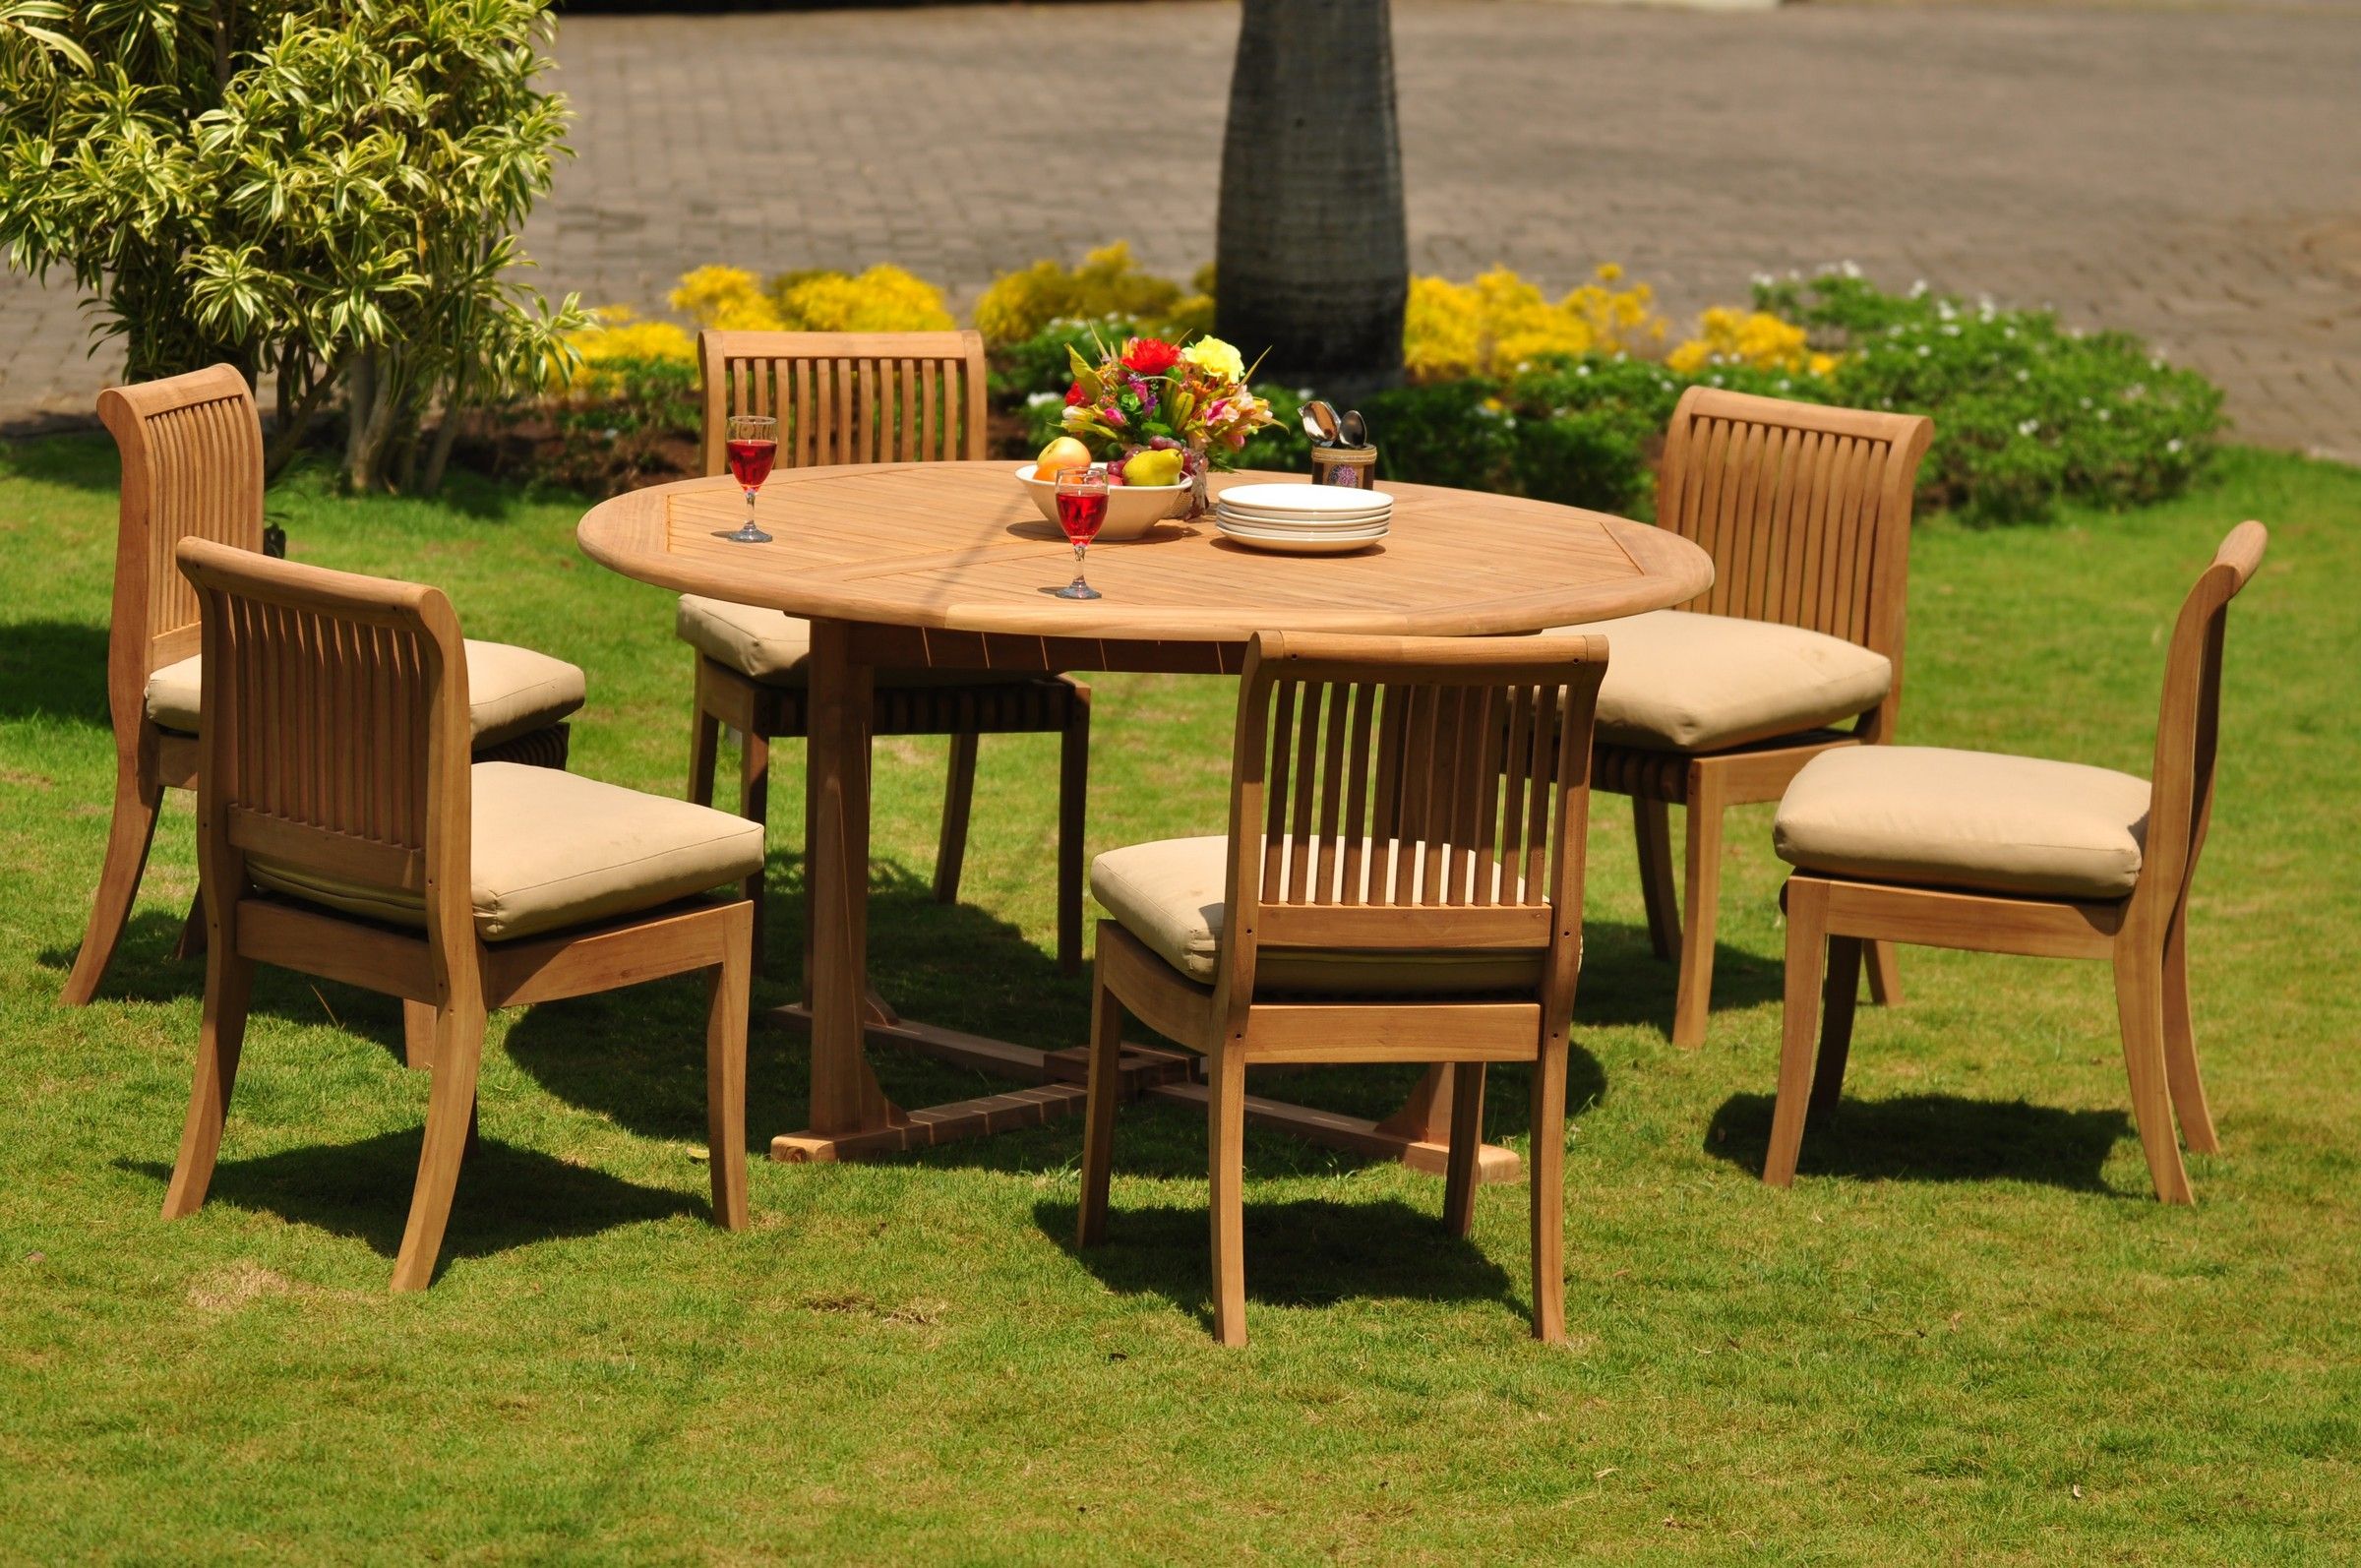 Teak Dining Set: 6 Seater 7 Pc: 60" Round Table And 6 Giva Armless Throughout Teak Folding Chair Patio Dining Sets (View 4 of 15)